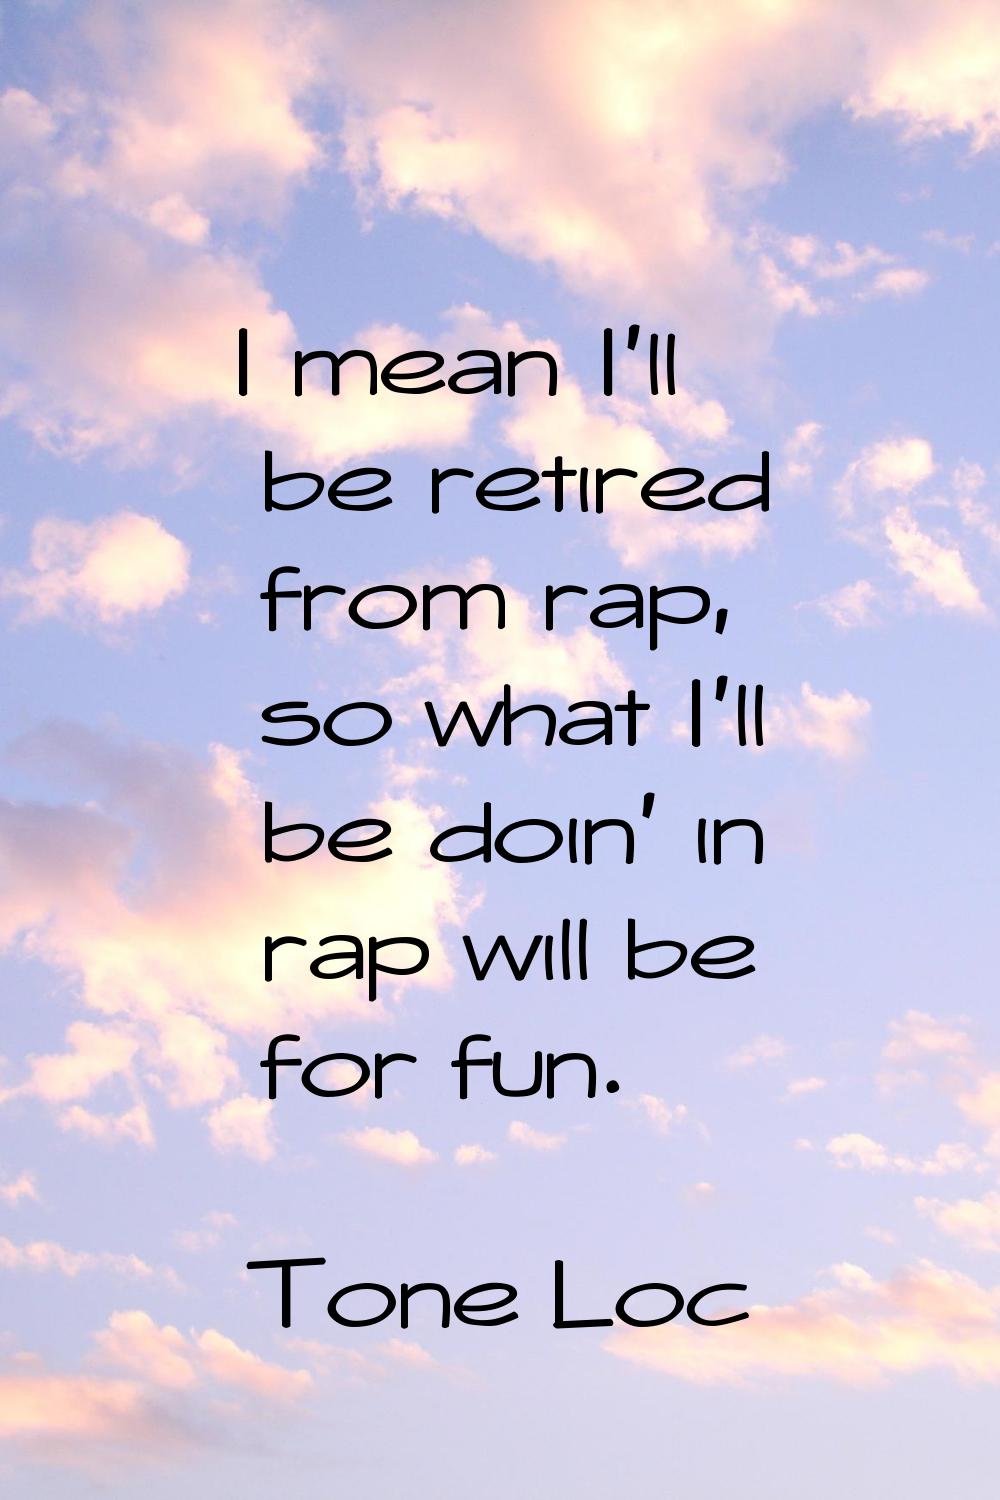 I mean I'll be retired from rap, so what I'll be doin' in rap will be for fun.